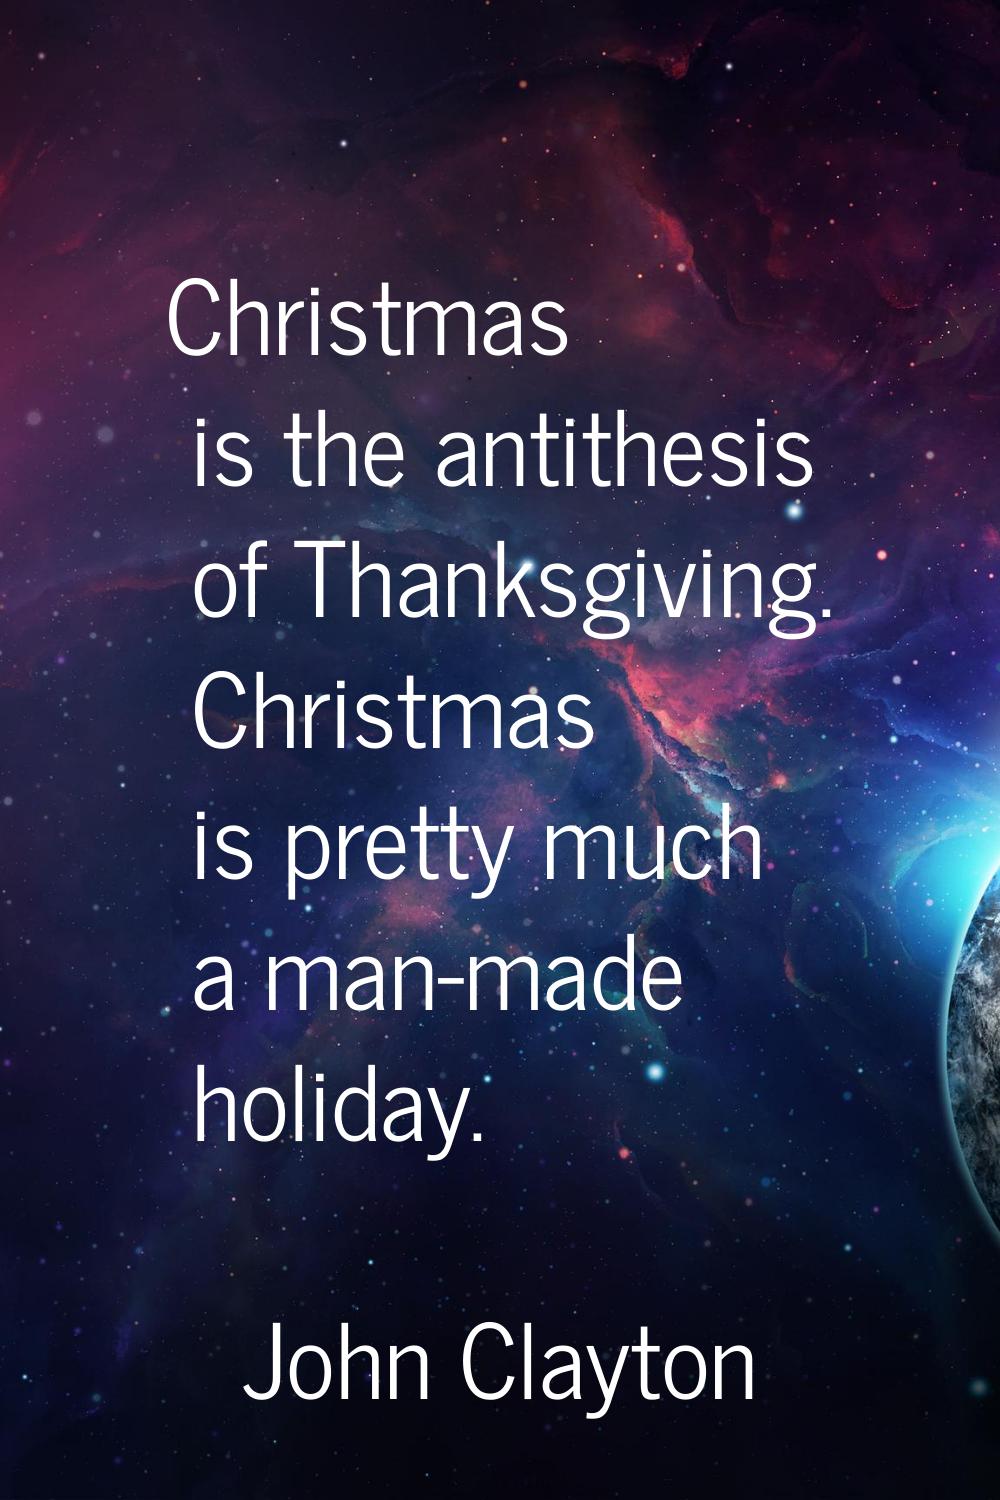 Christmas is the antithesis of Thanksgiving. Christmas is pretty much a man-made holiday.